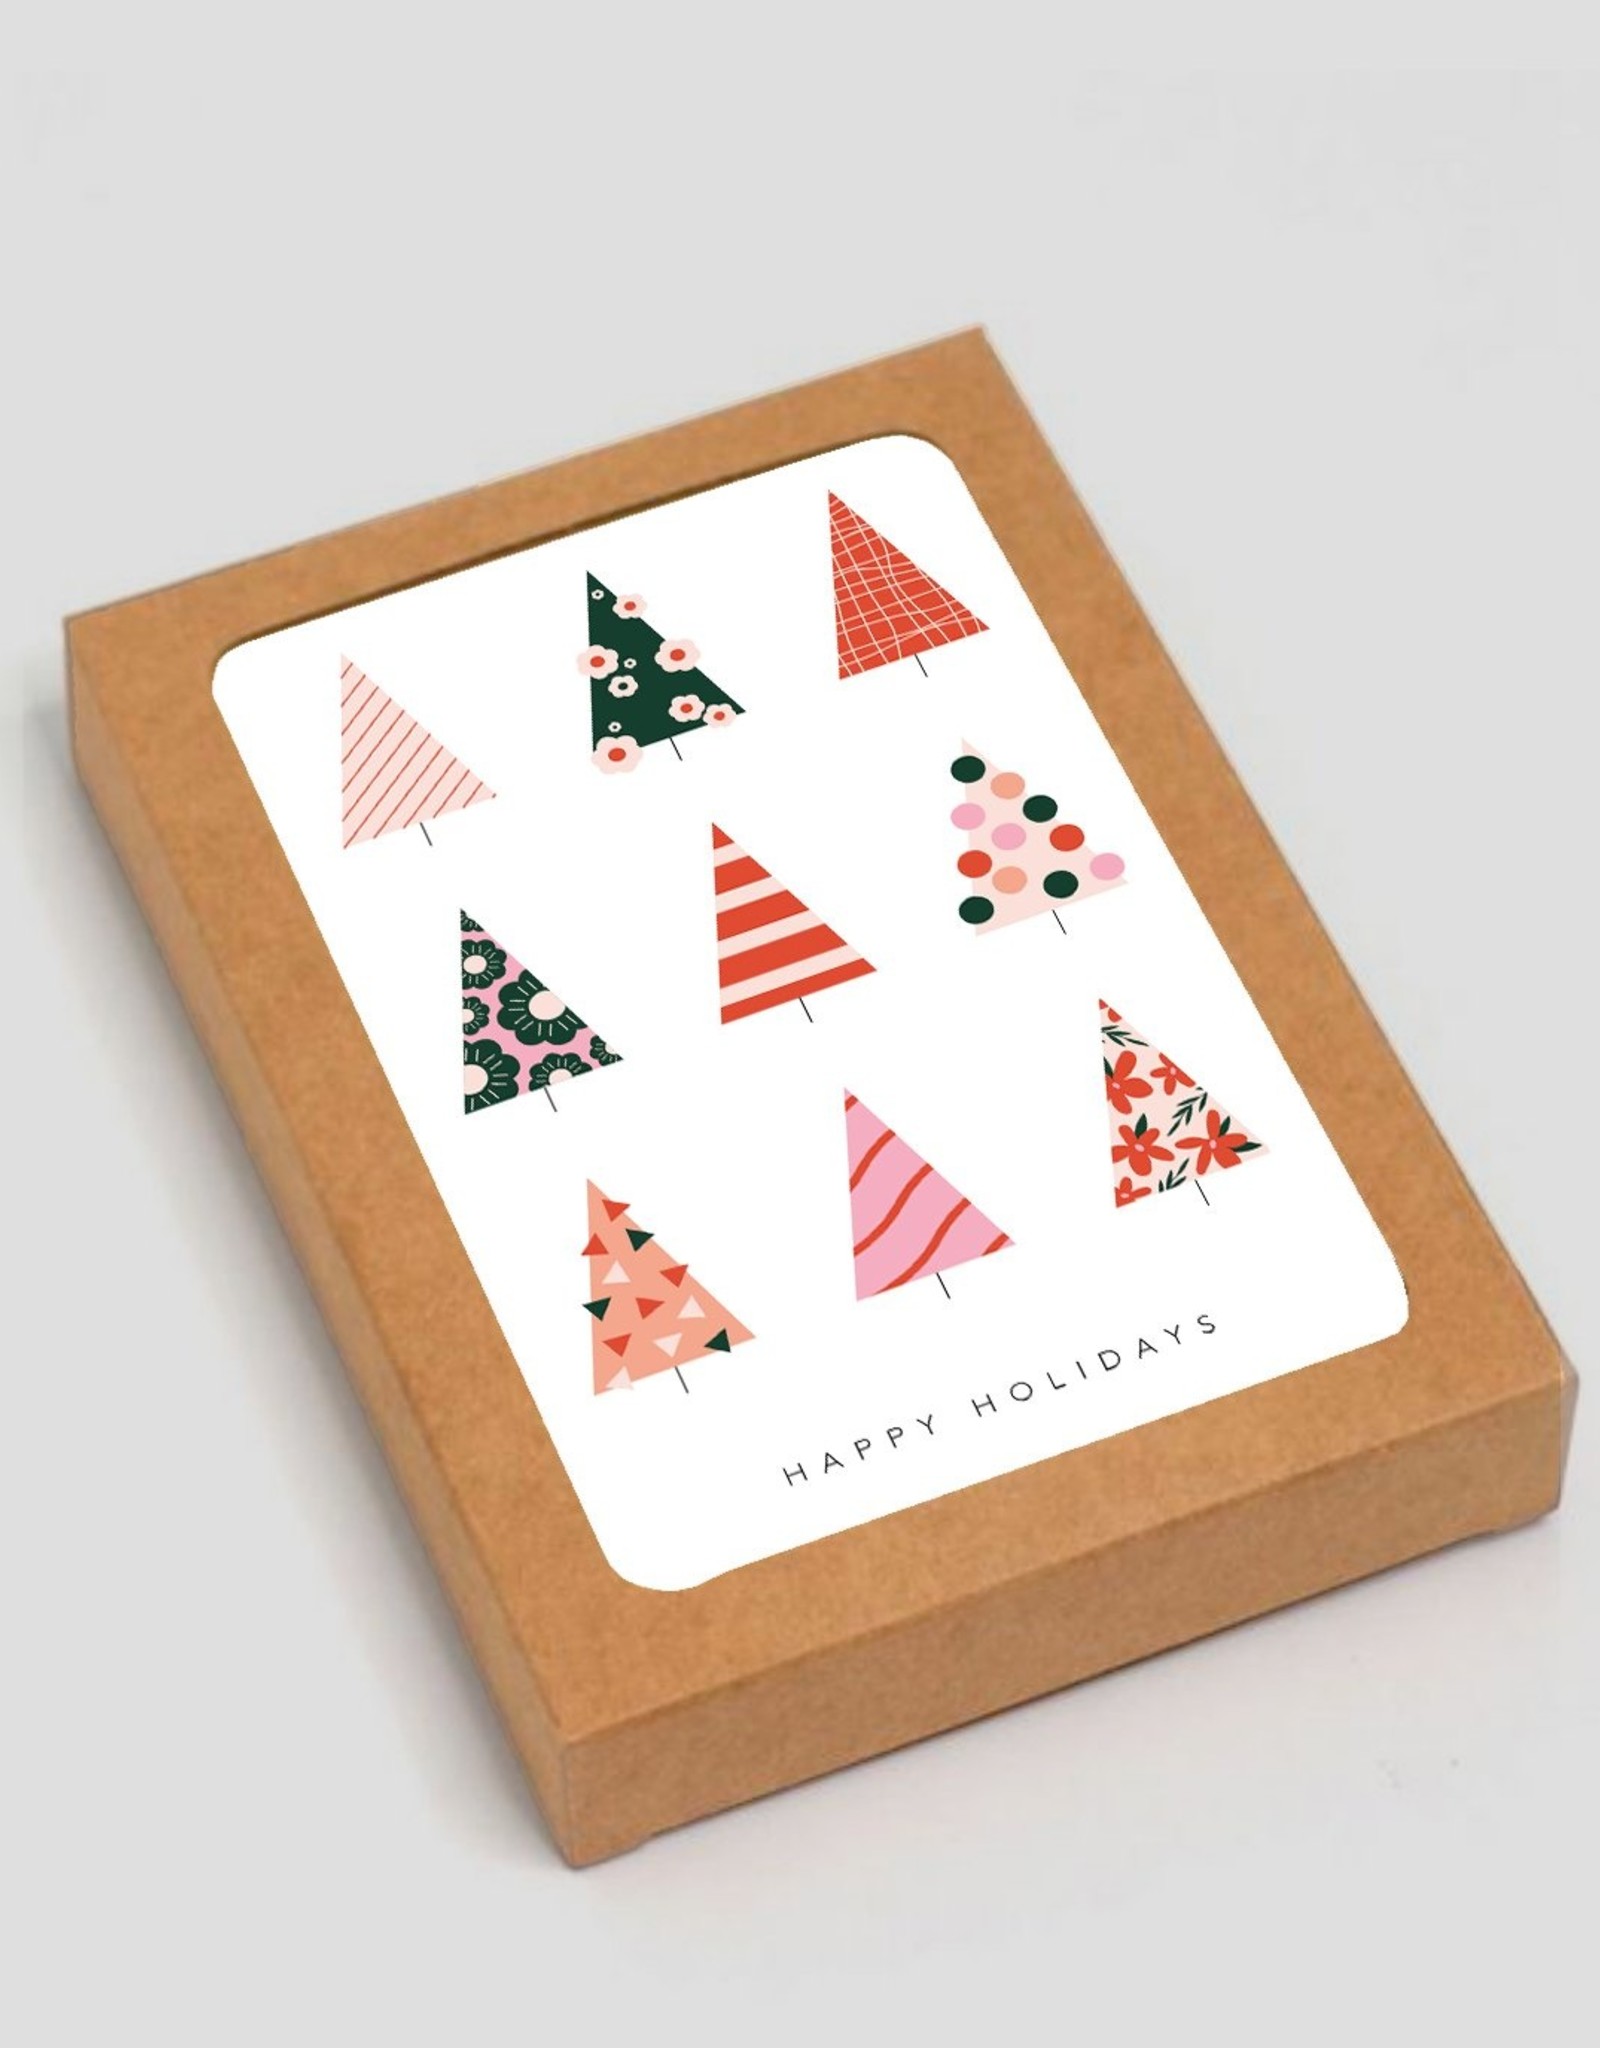 Spaghetti and Meatballs Boxed Holiday Cards - Happy Holidays: Modern Christmas Trees